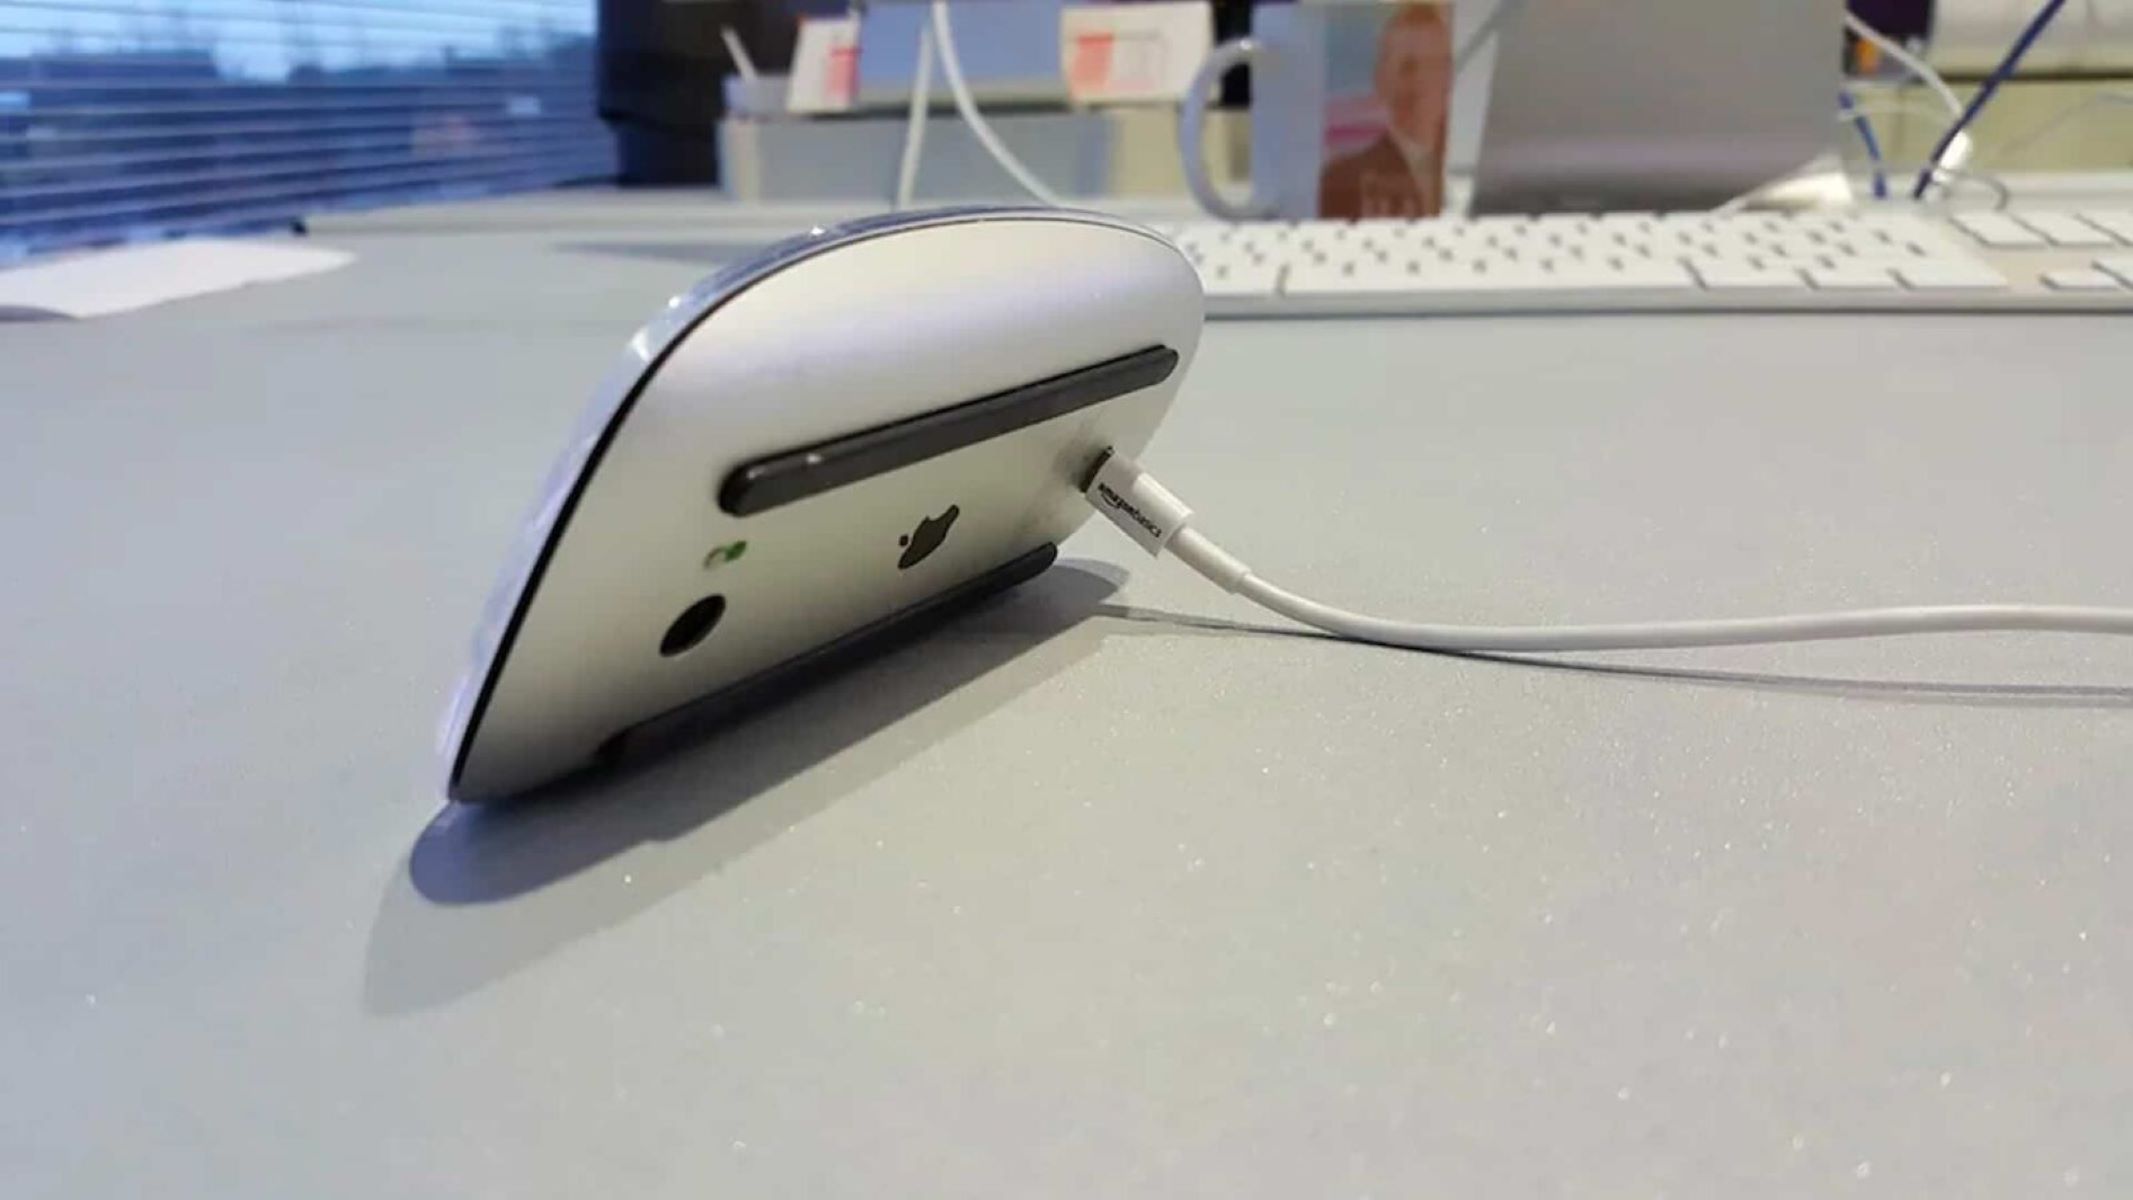 How To Charge A Wireless Mouse